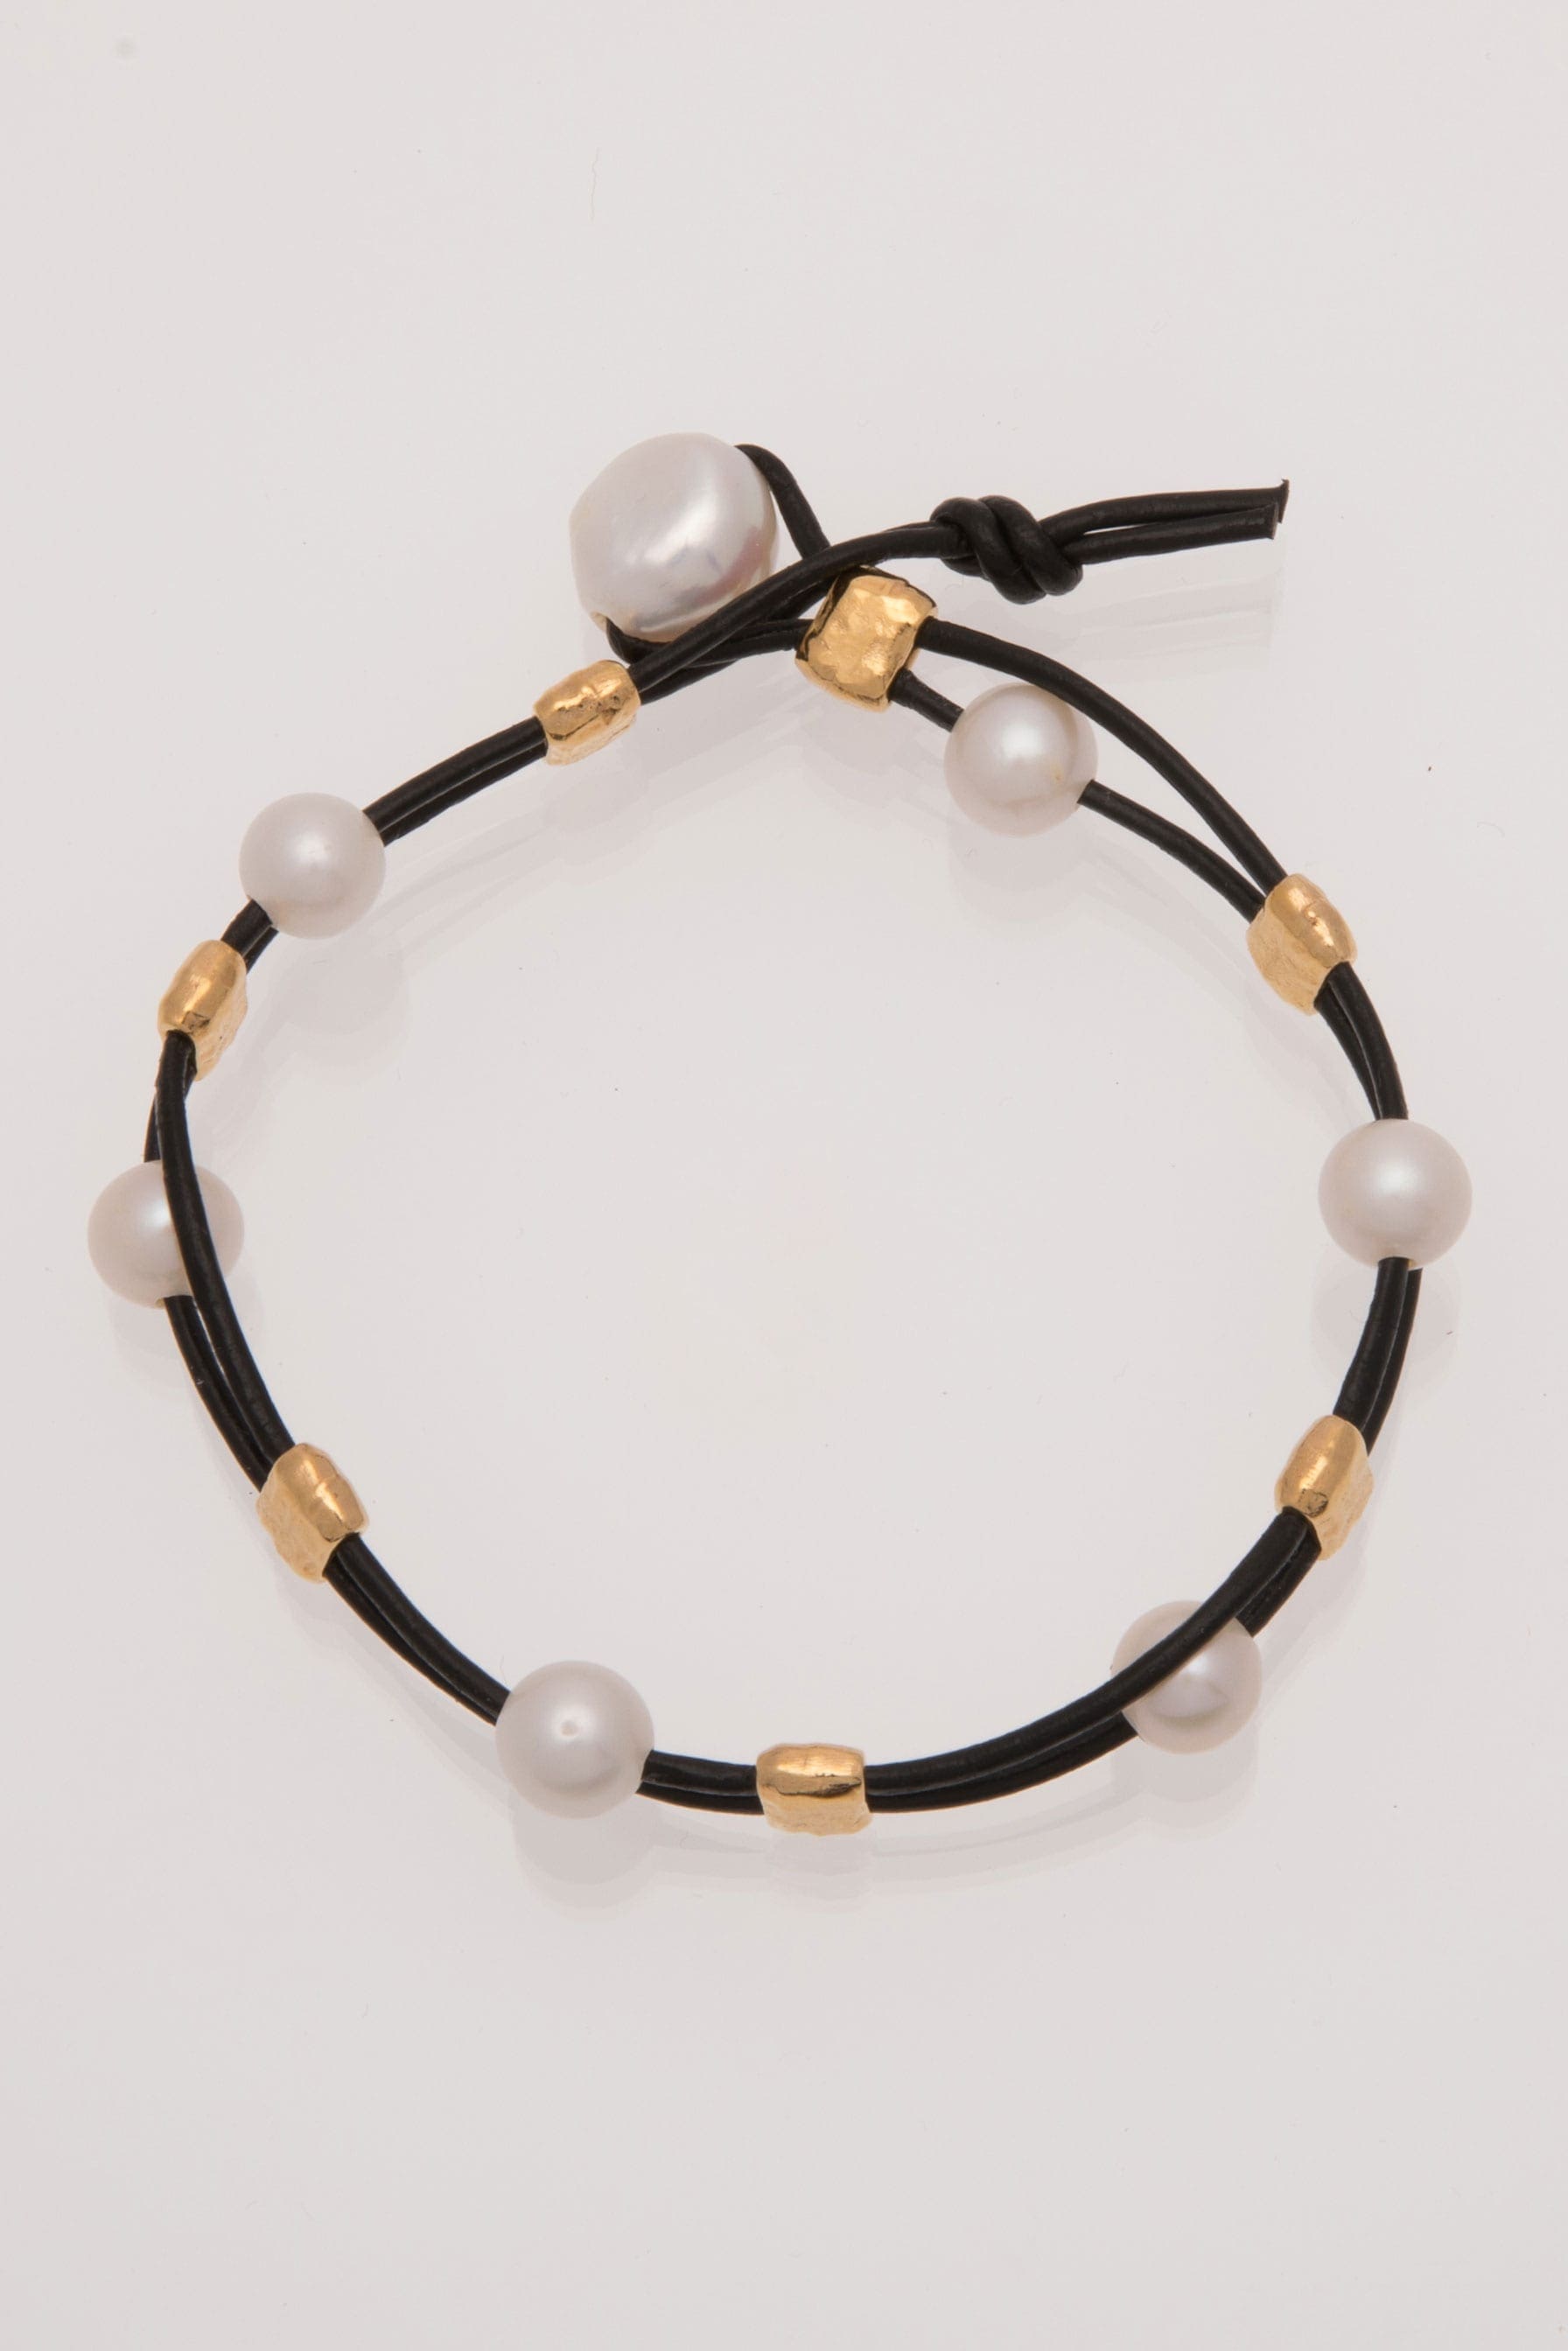 Black Leather and White Pearl Bracelet with Gold Barrel Beads, BOHO ...